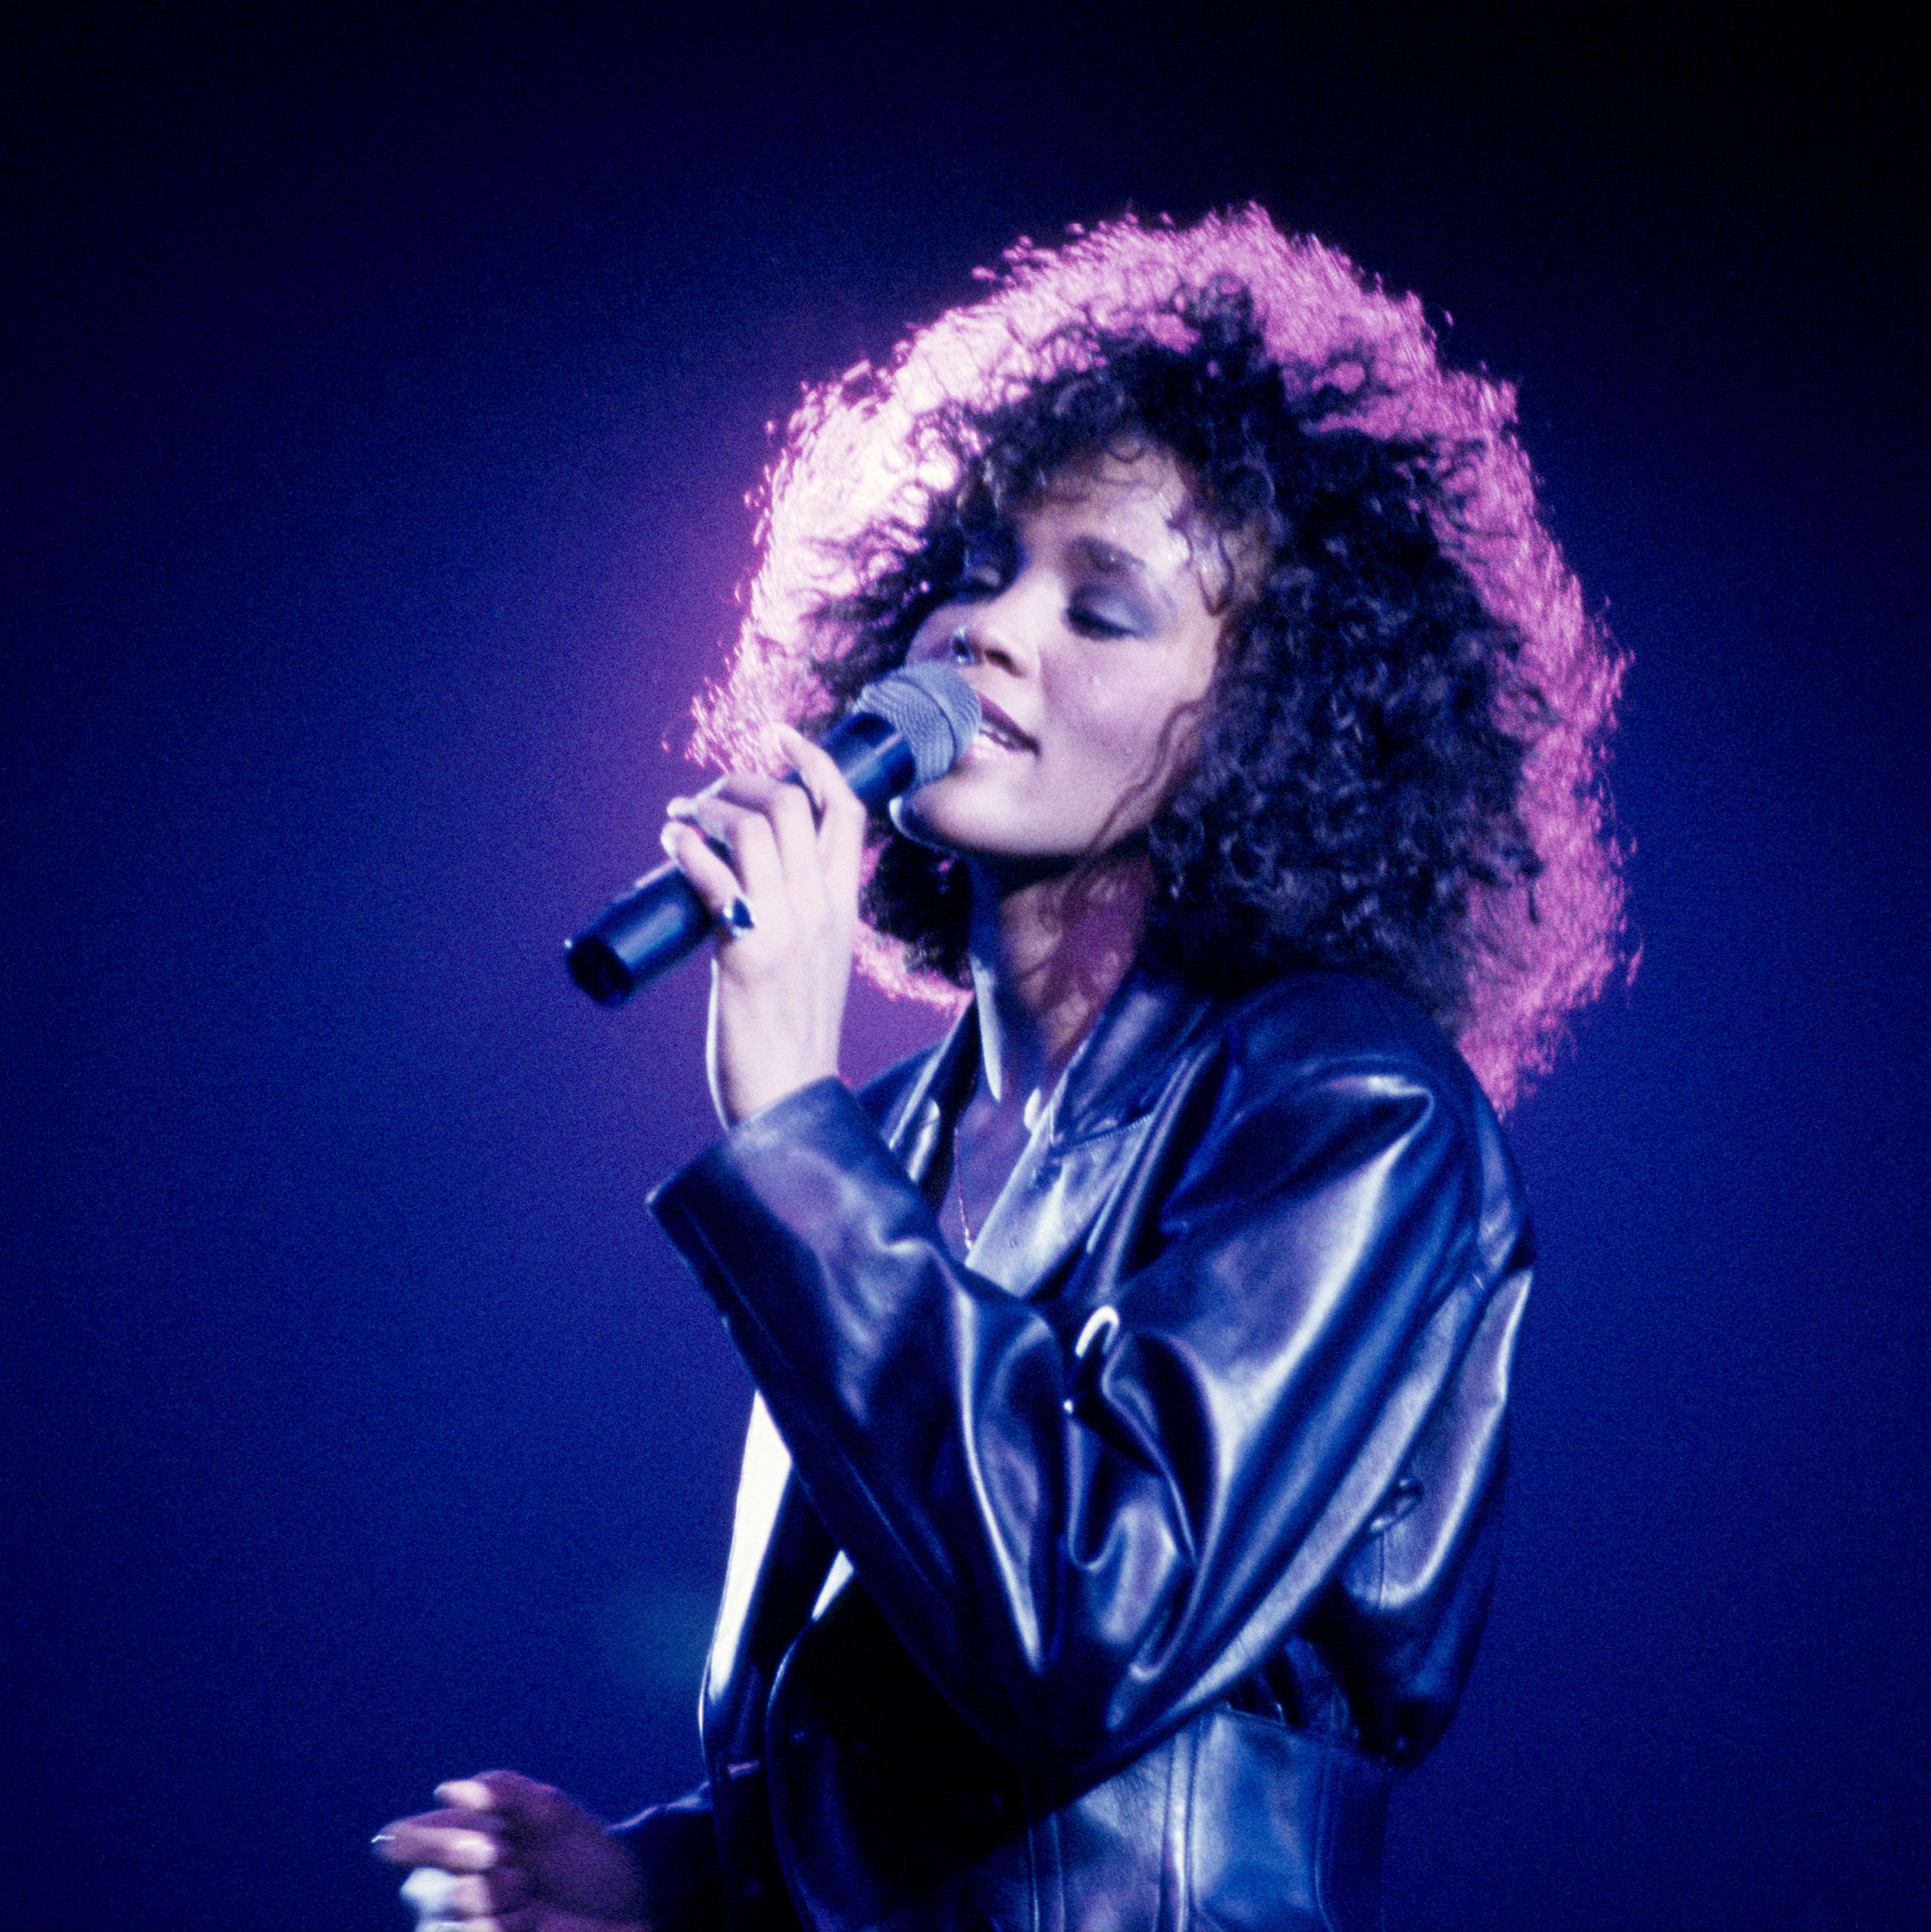 Whitney Houston sings on stage at Wembley Arena in 1988